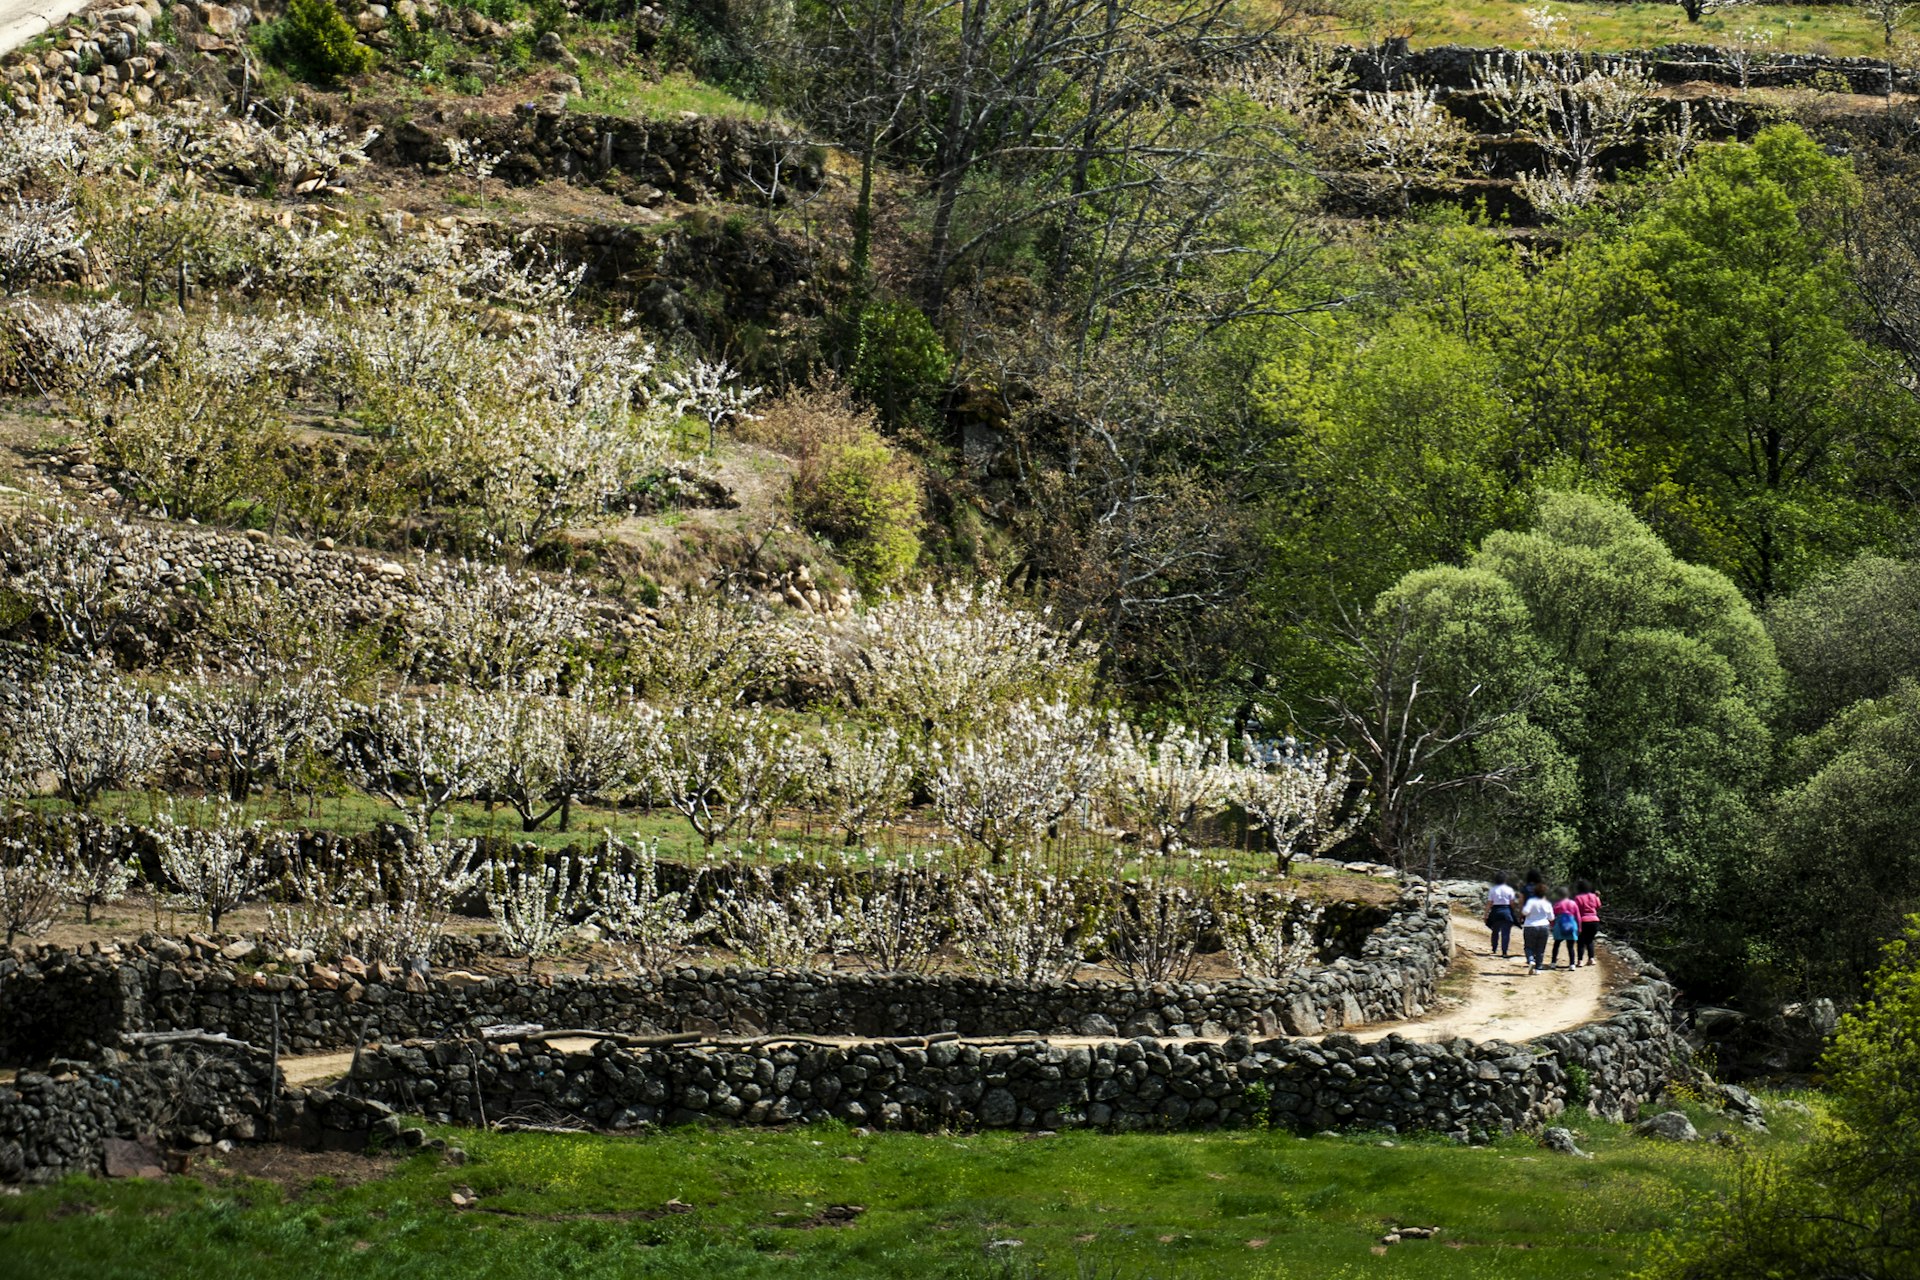 People walking on a path among cherry blossoms in the Jerte Valley, Cáceres, Extremadura, Spain.